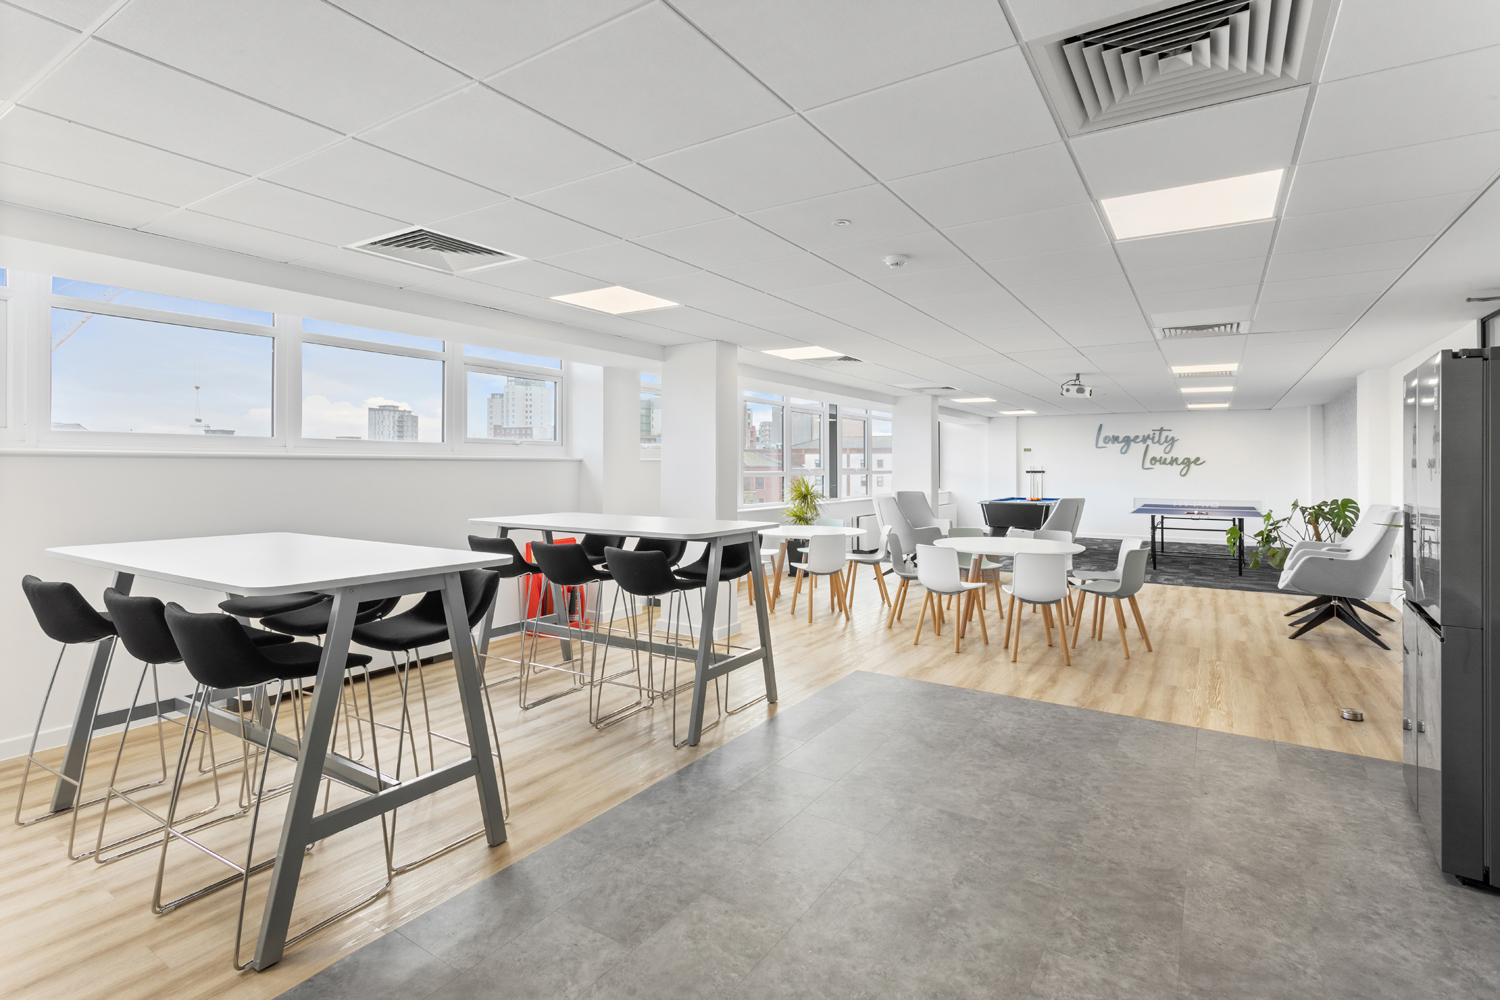 CG-Analysts Office Fit-Out Spacio